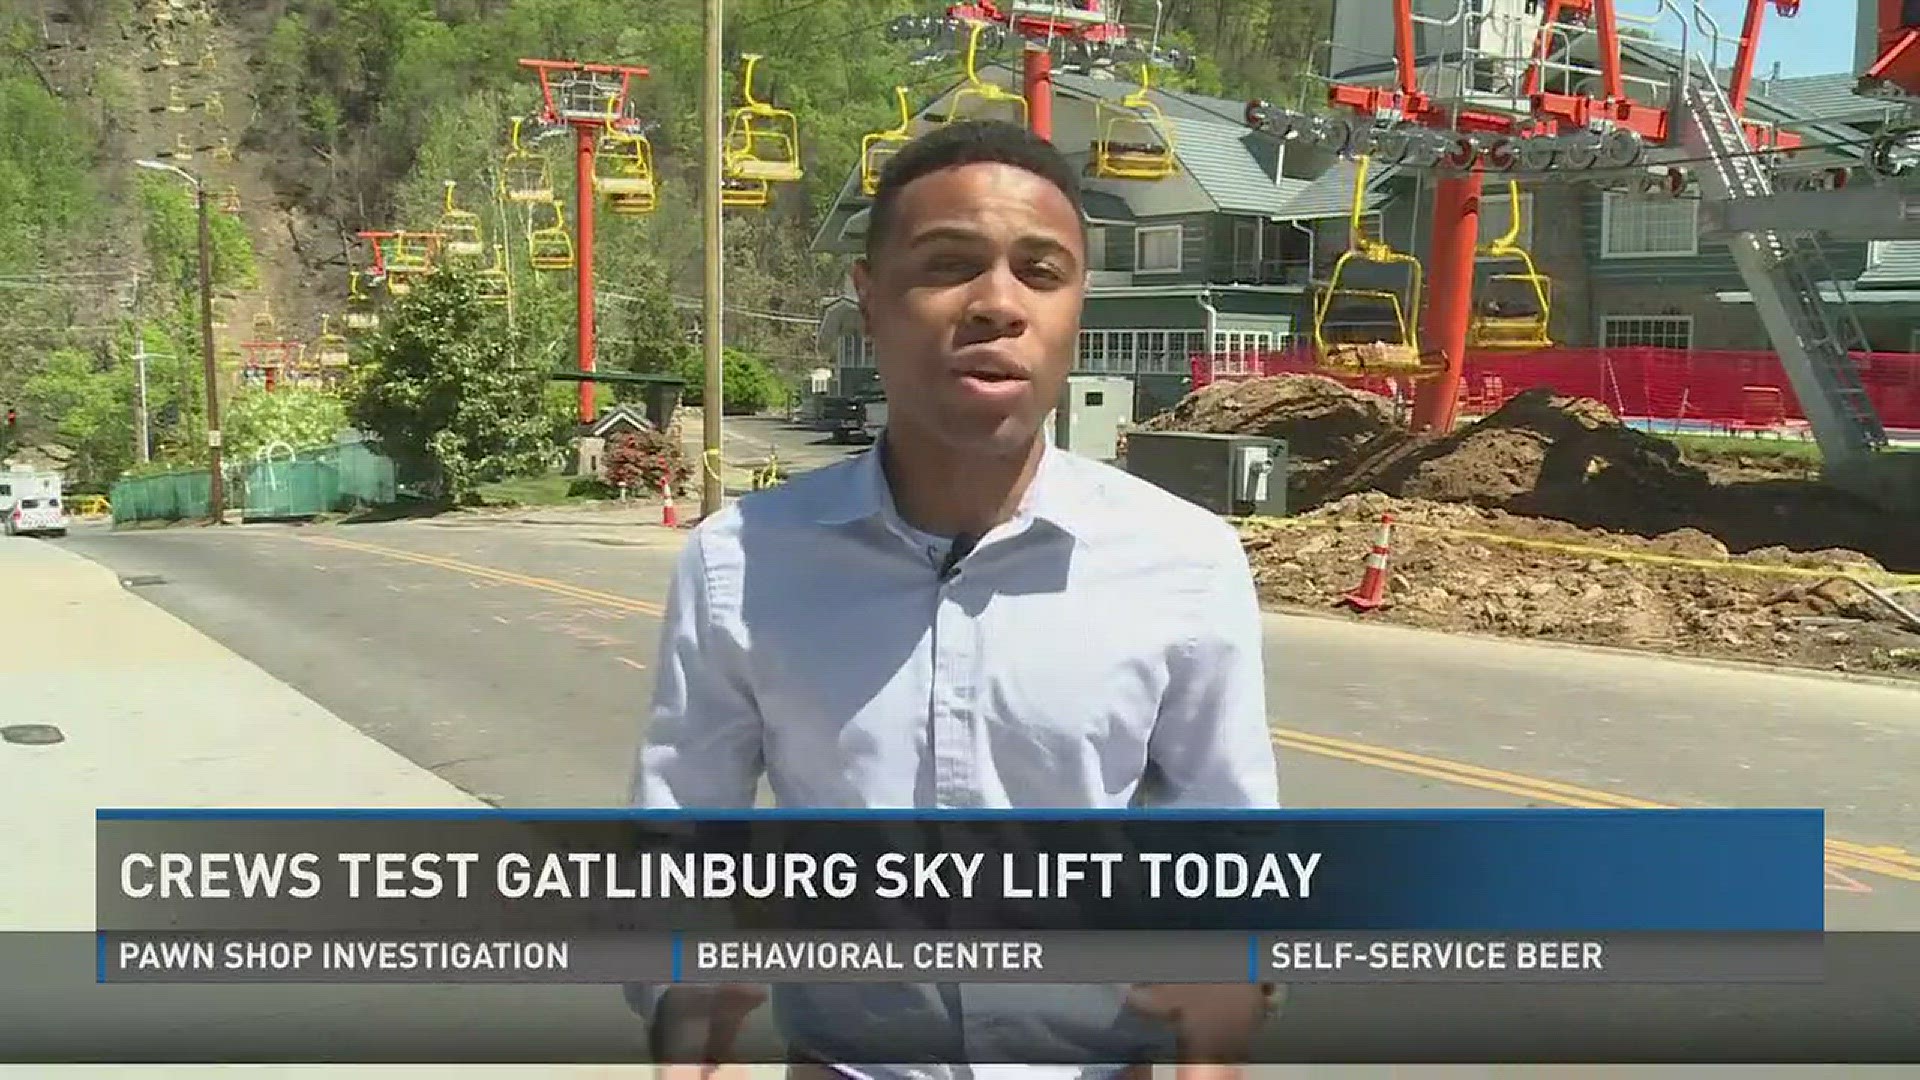 If all goes according to plan, an iconic part of downtown Gatlinburg should be up and running by Memorial Day weekend. (4/26/17 Noon)